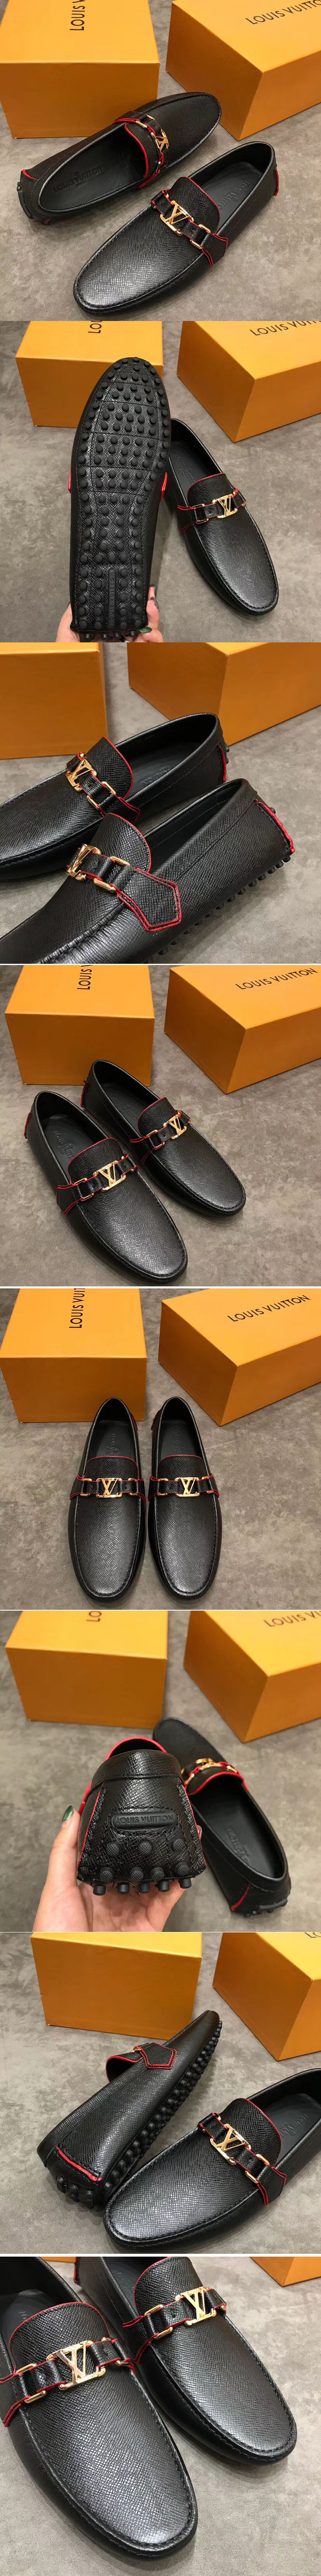 Replica Louis Vuitton LV Hockenheim Loafer And Shoes Black Calf Leather Red Stitch